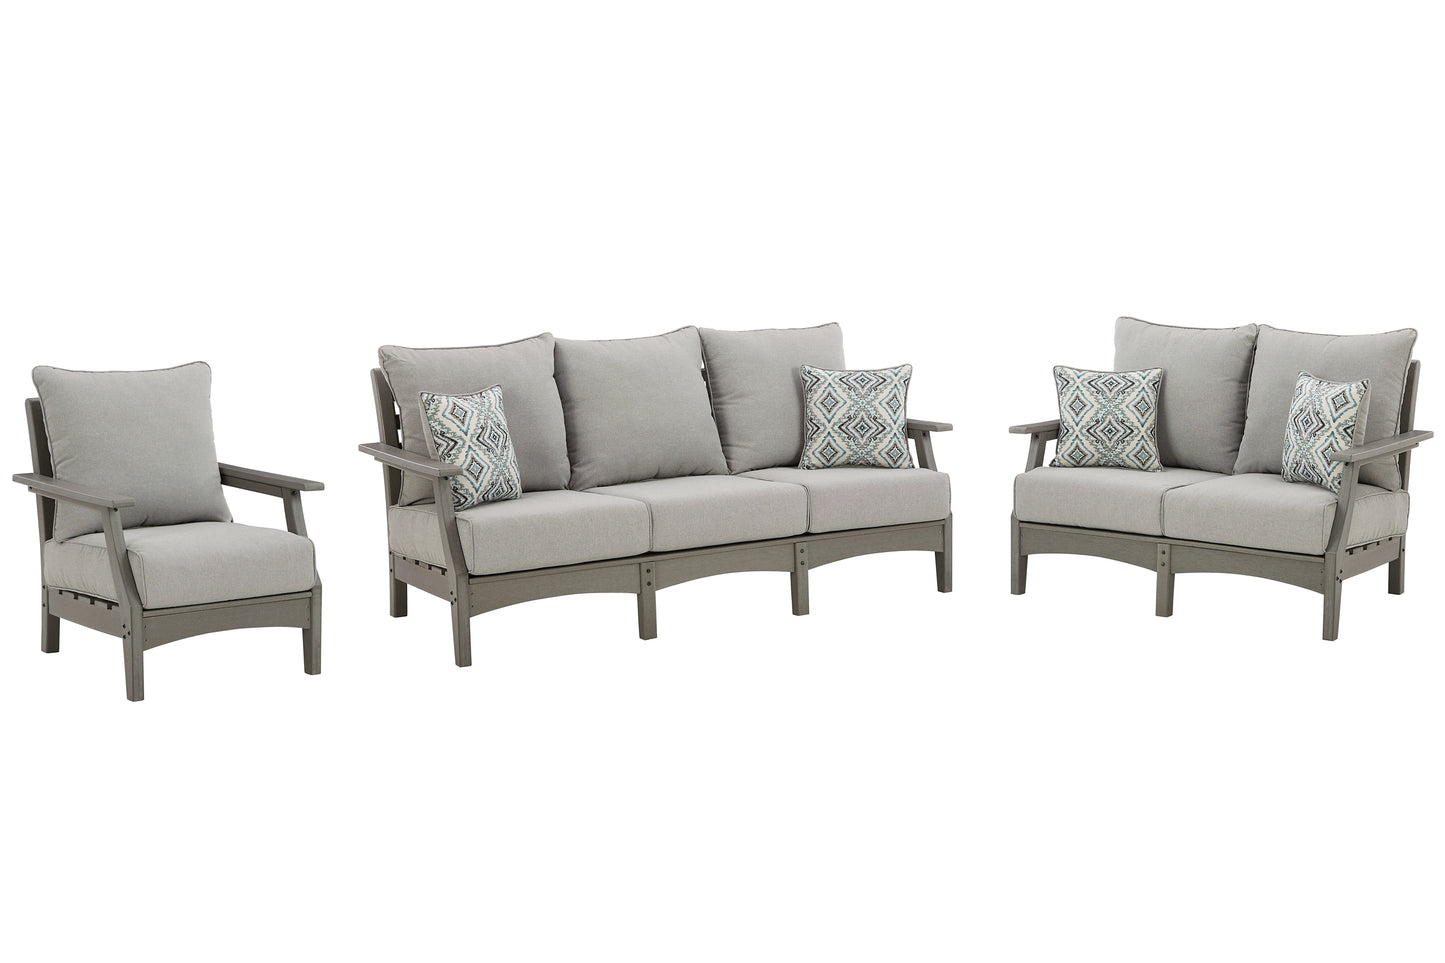 Visola Outdoor Sofa, Loveseat and Chair Signature Design by Ashley®